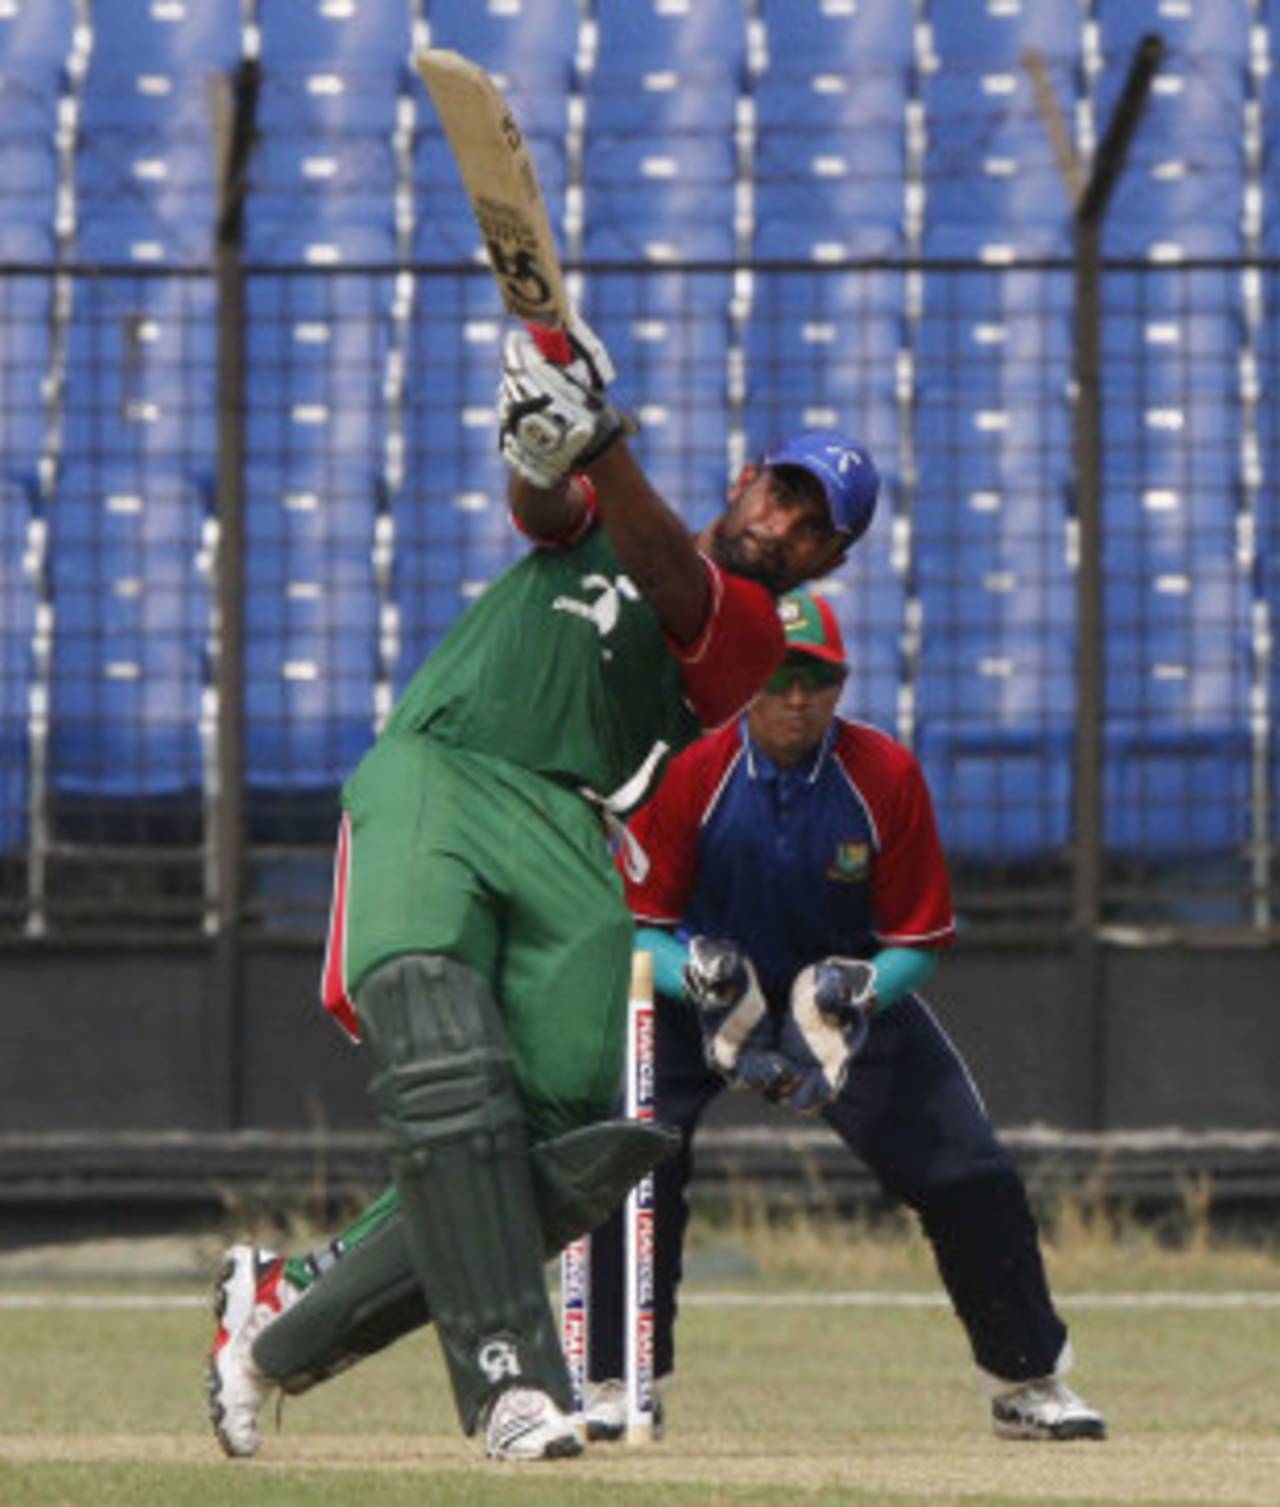 Tamim Iqbal is the icon player for the Chittagong franchise, which was bought for $1.2 million&nbsp;&nbsp;&bull;&nbsp;&nbsp;BCB